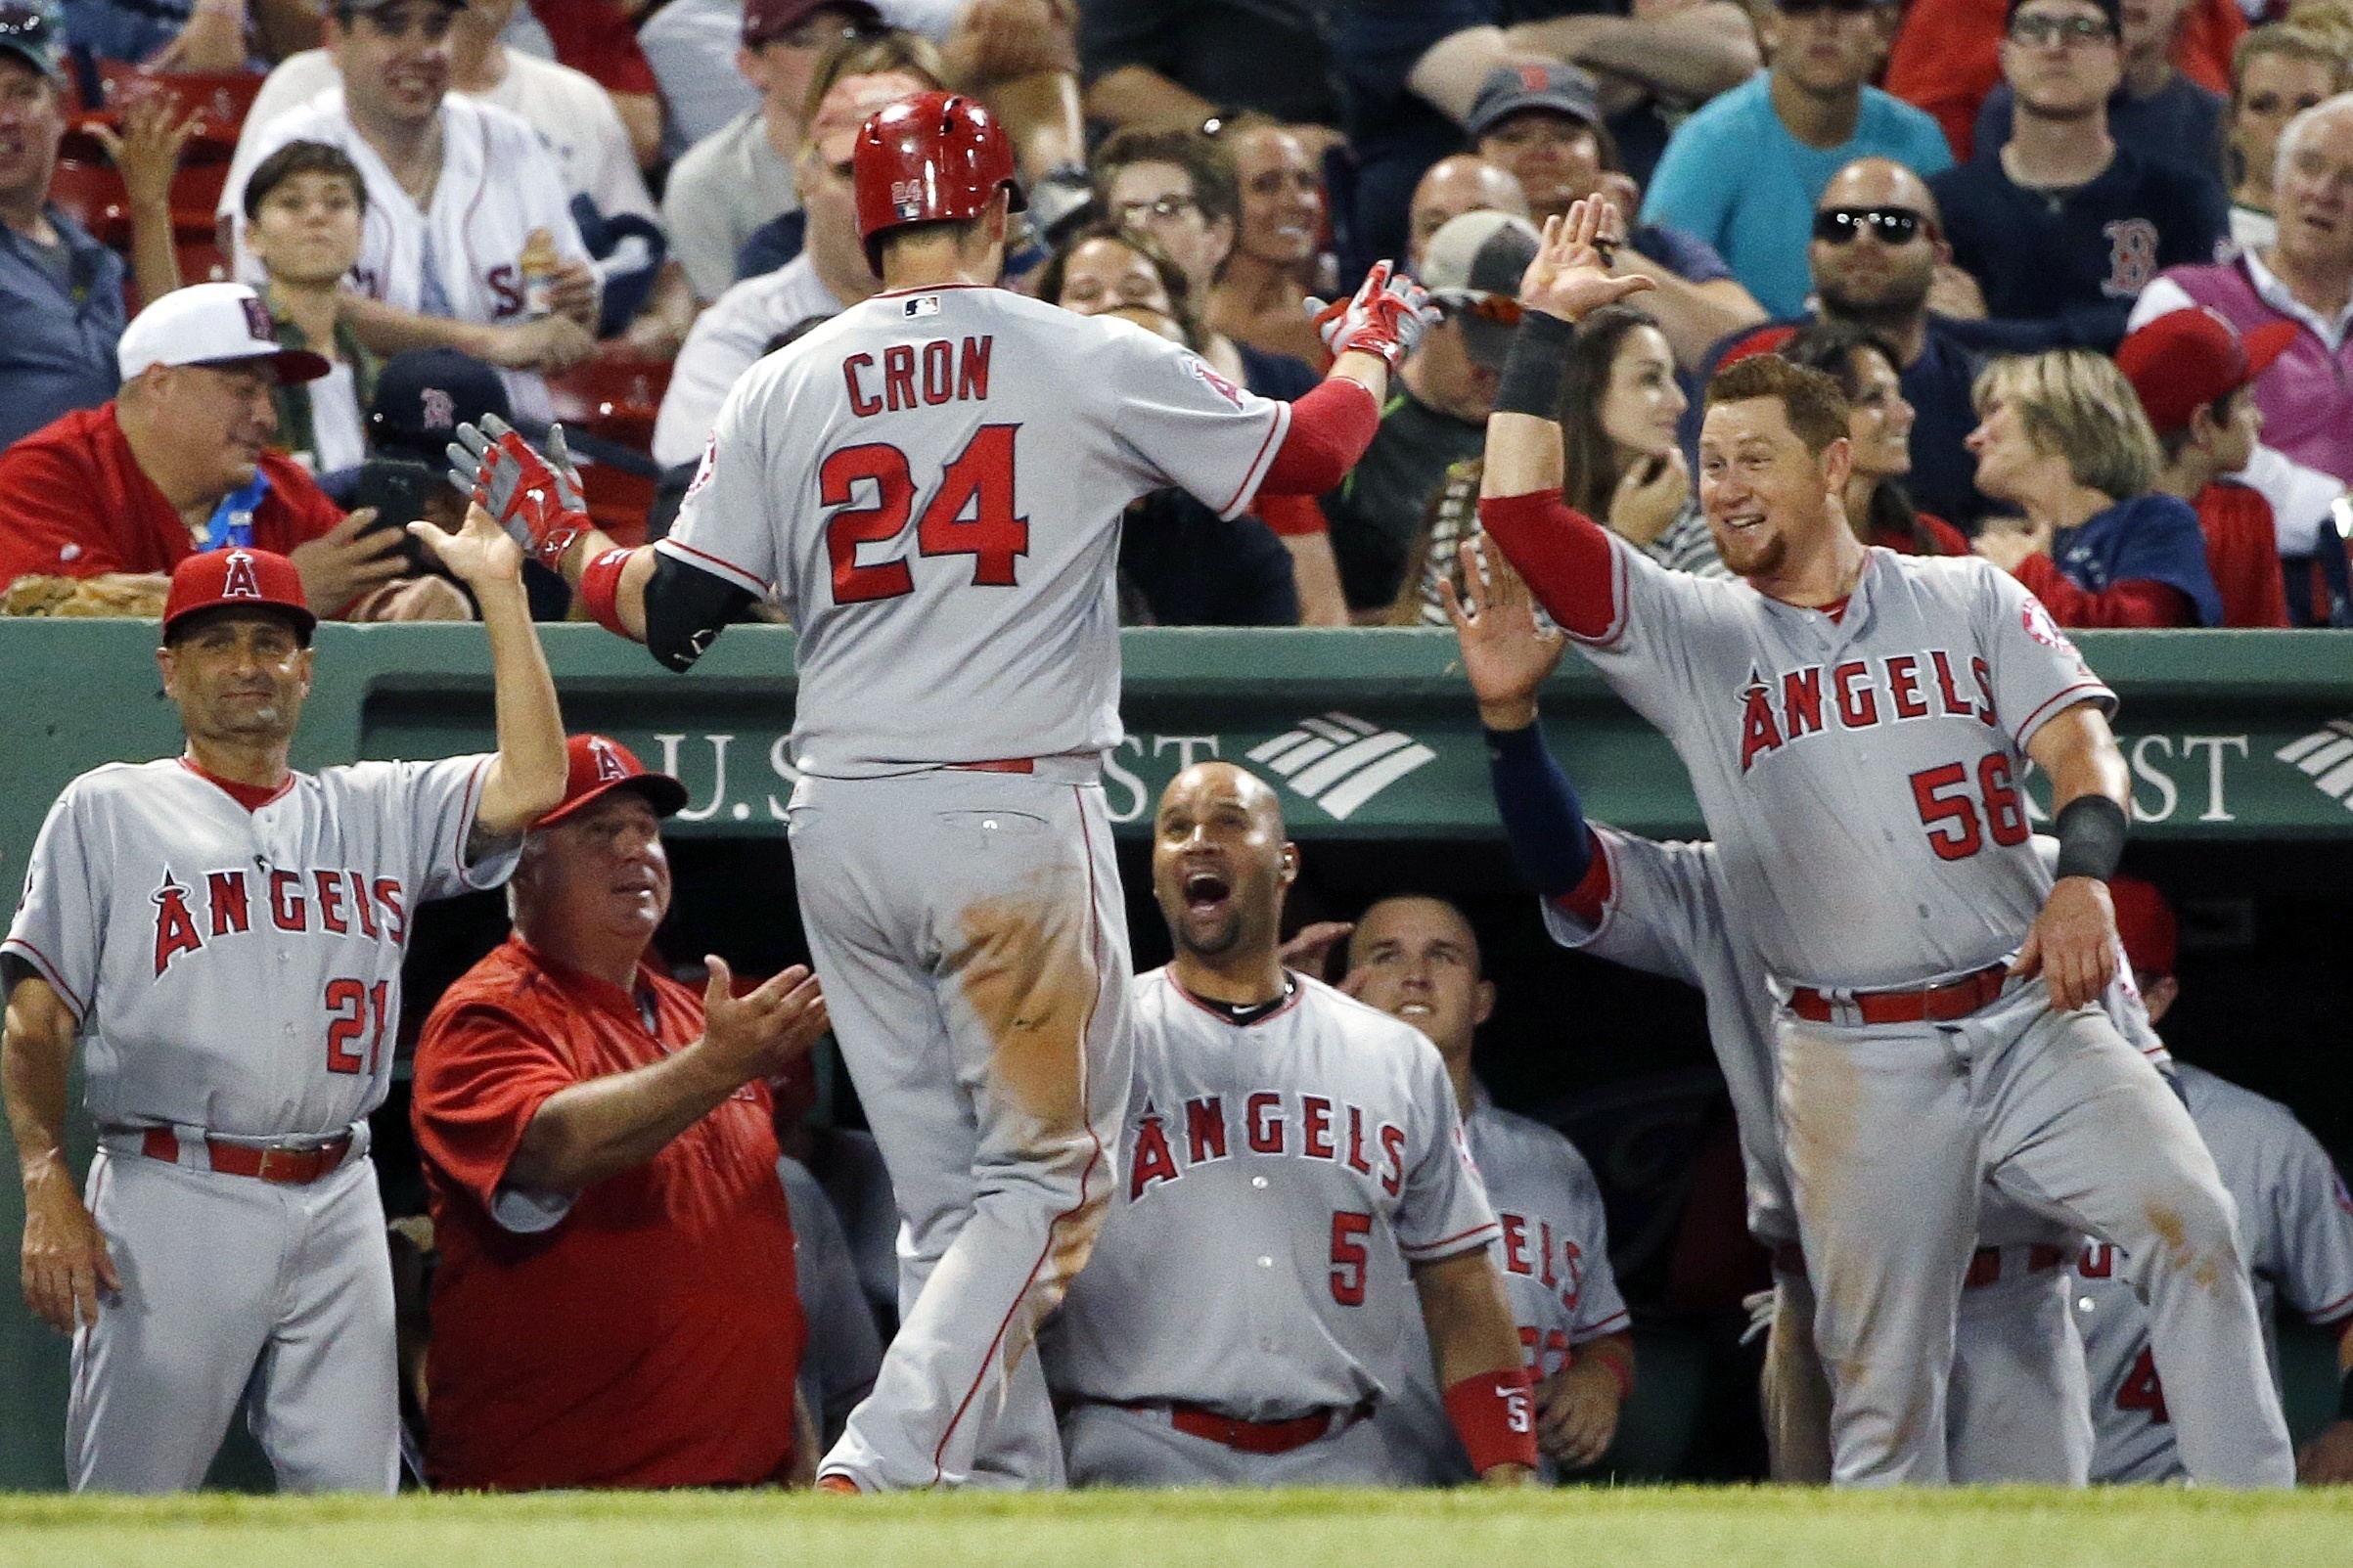 Angels embarrass Red Sox 21-2; Boston's worst loss in 16 years